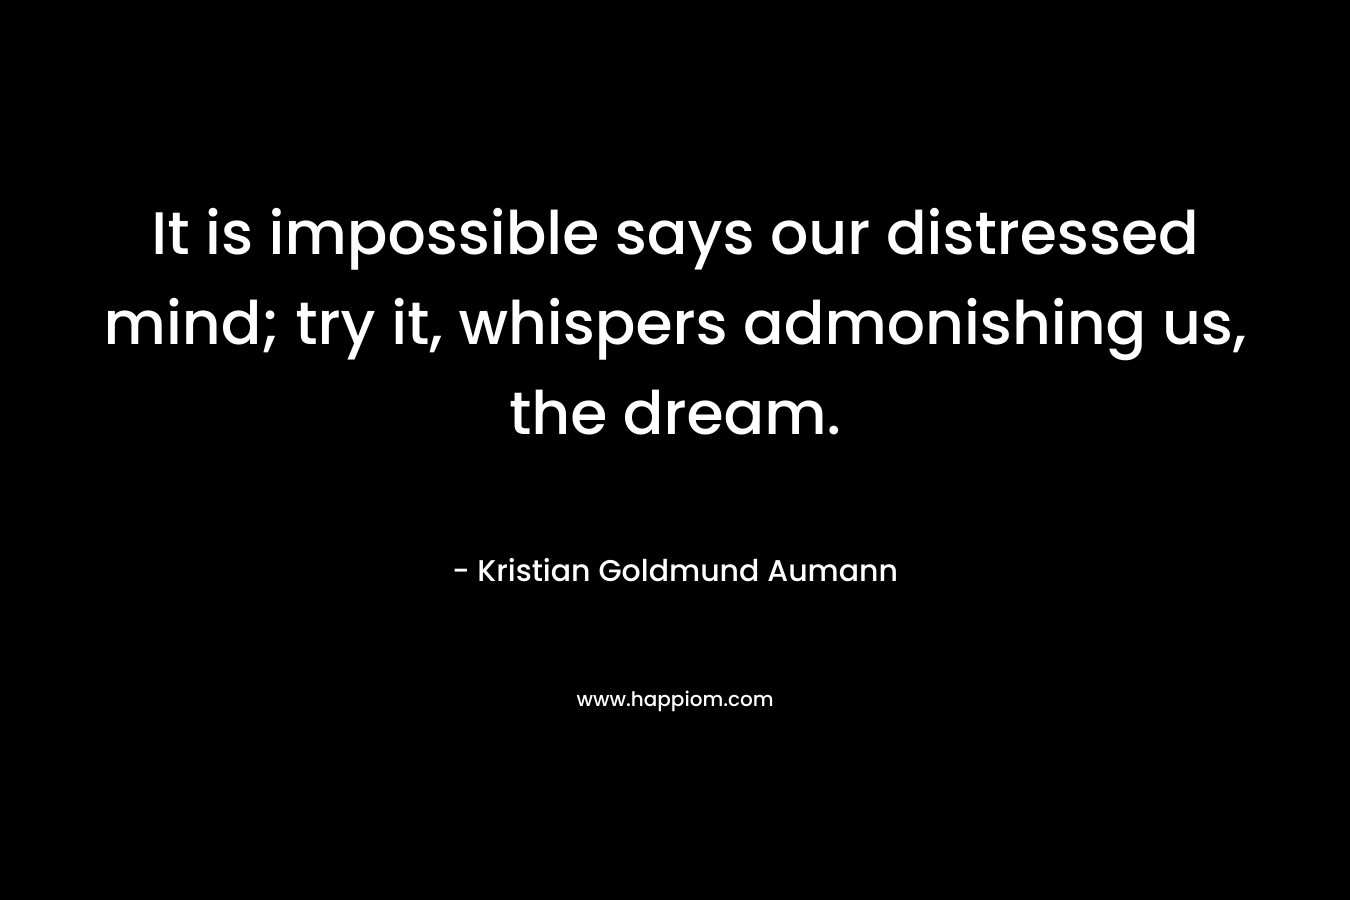 It is impossible says our distressed mind; try it, whispers admonishing us, the dream.